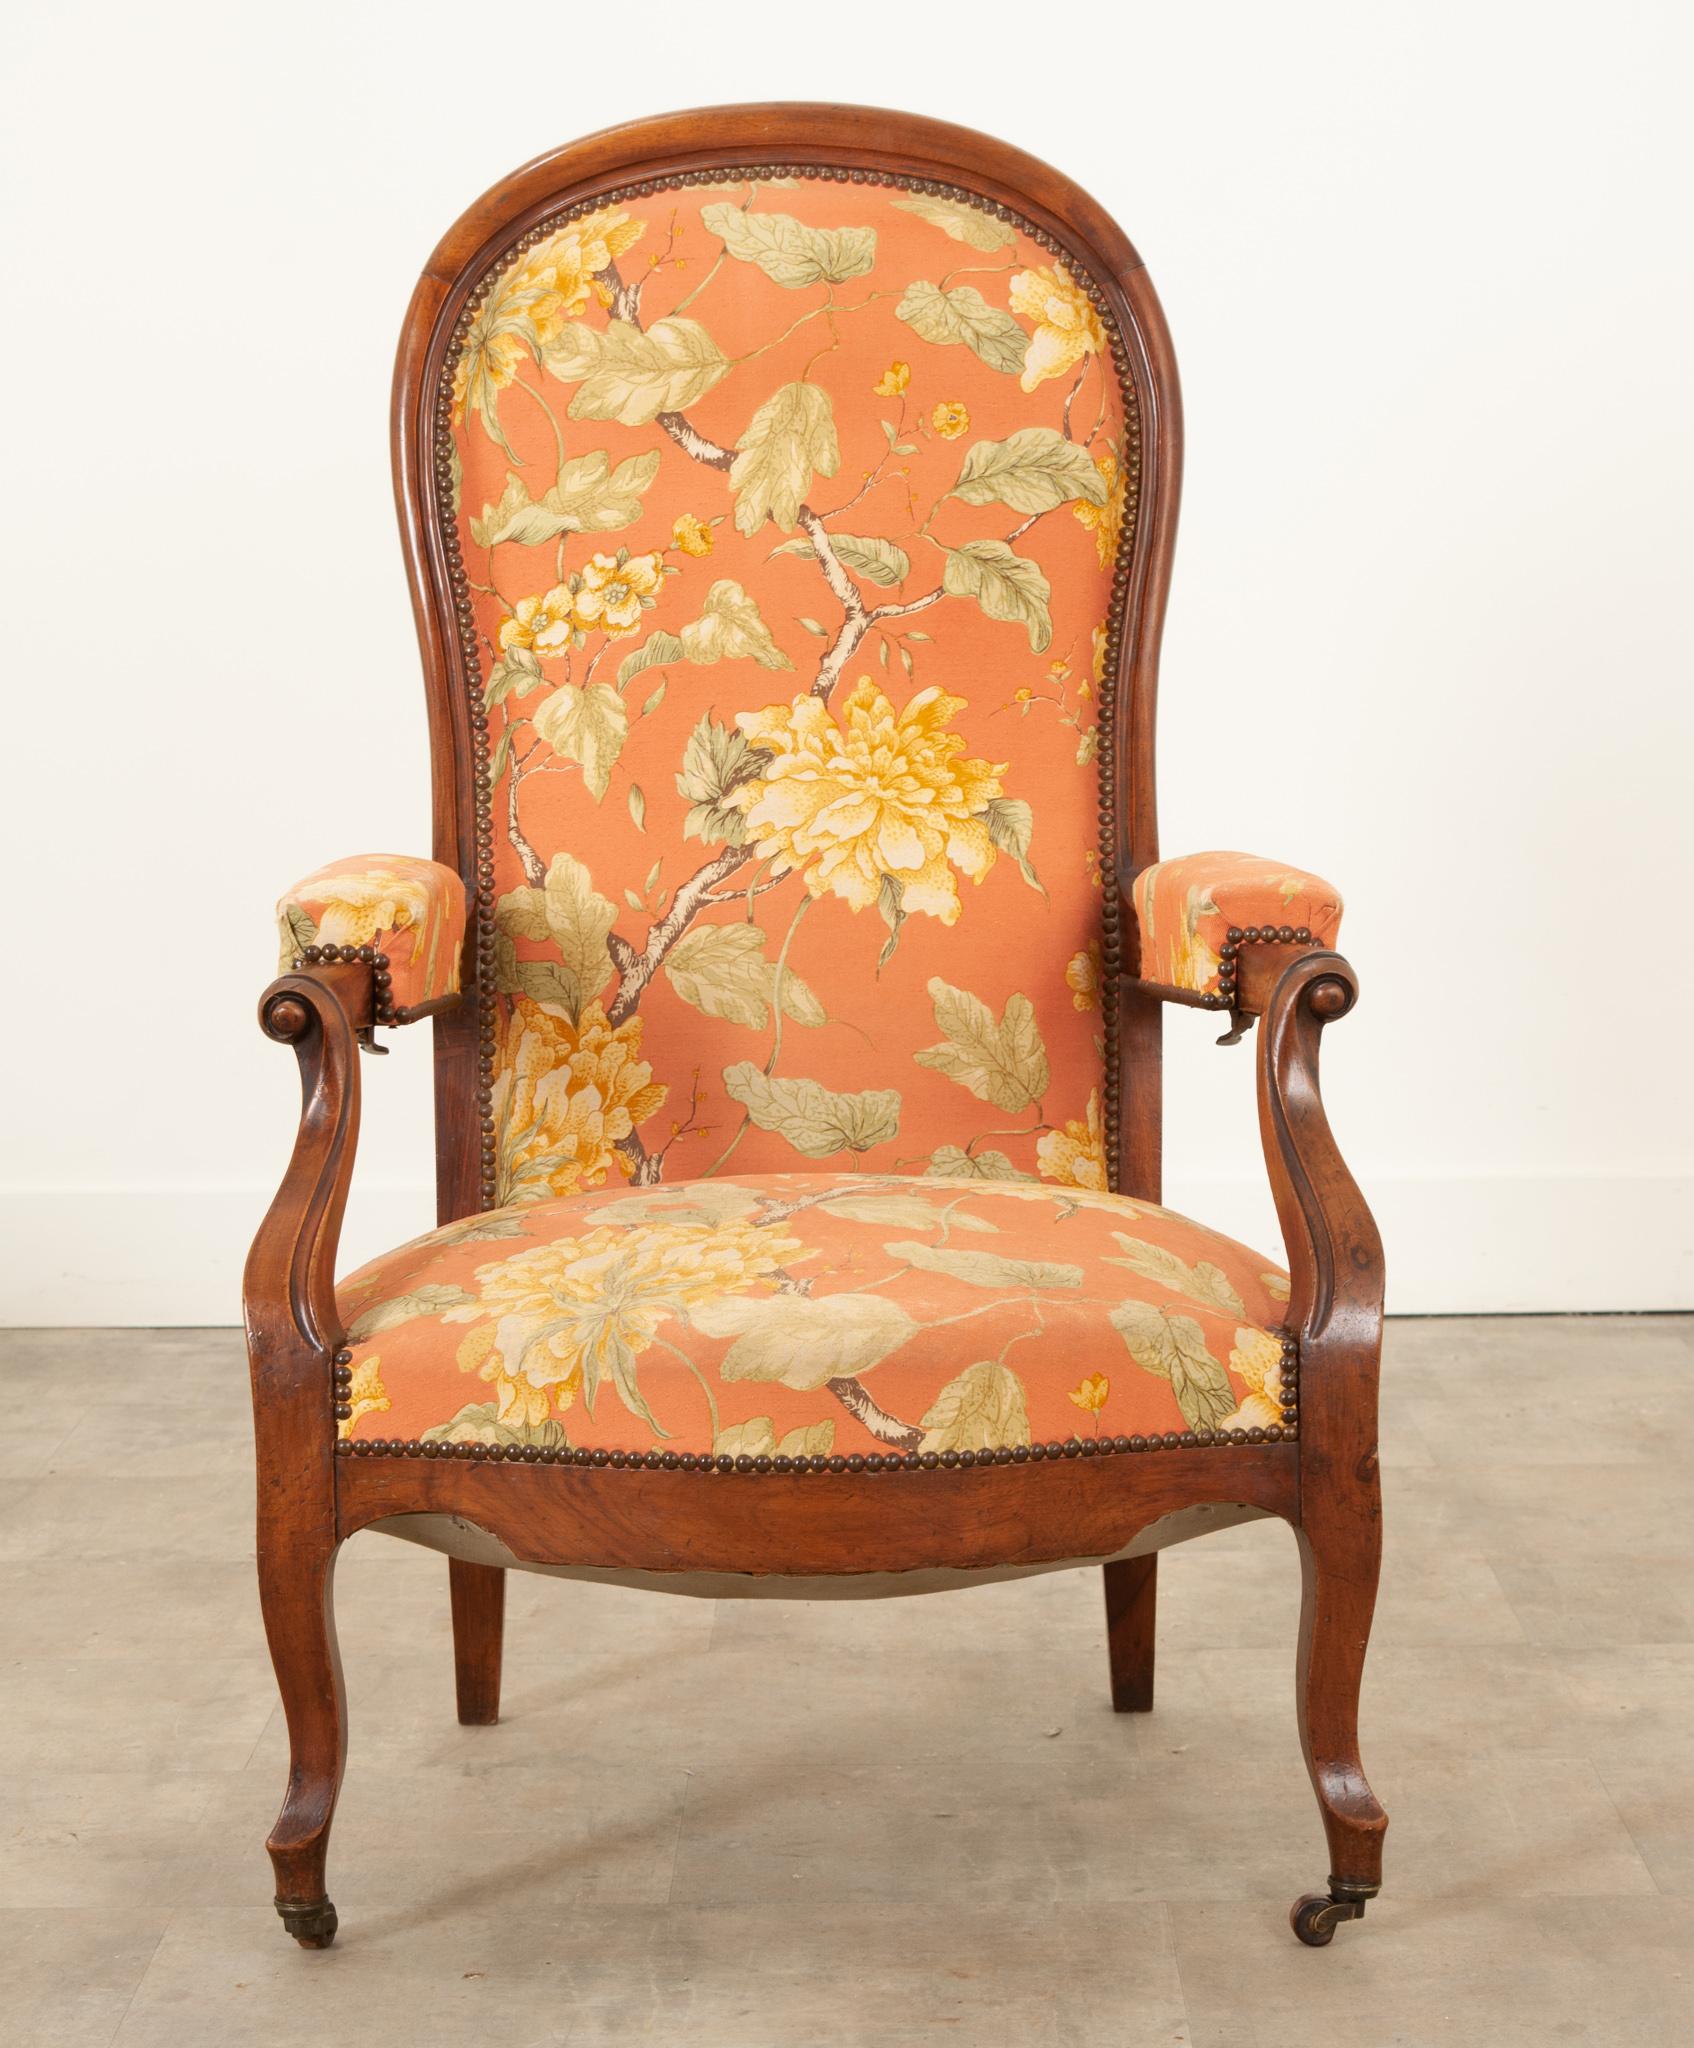 Victorian English 19th Century Upholstered Mahogany Recliner For Sale